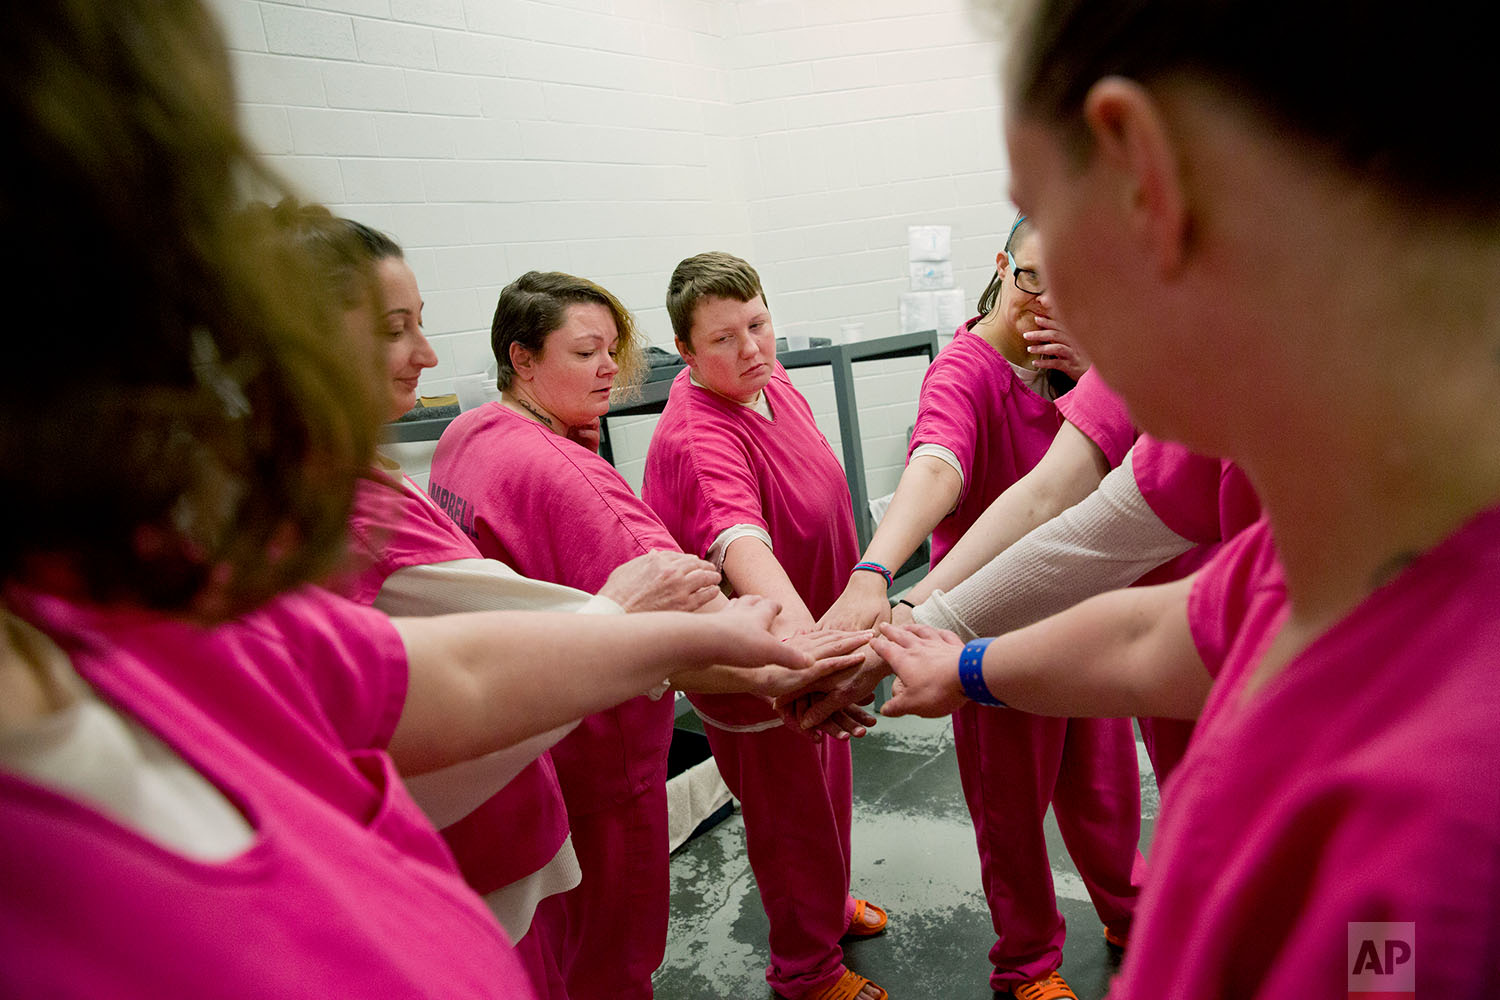  Cellmates Elsie Kniffen, from left, Mary Sammons, Blanche Ball and Sarai Keelean, join hands after a prayer in the Campbell County Jail in Jacksboro, Tenn., Tuesday, March 20, 2018. AP Photo/David Goldman) 